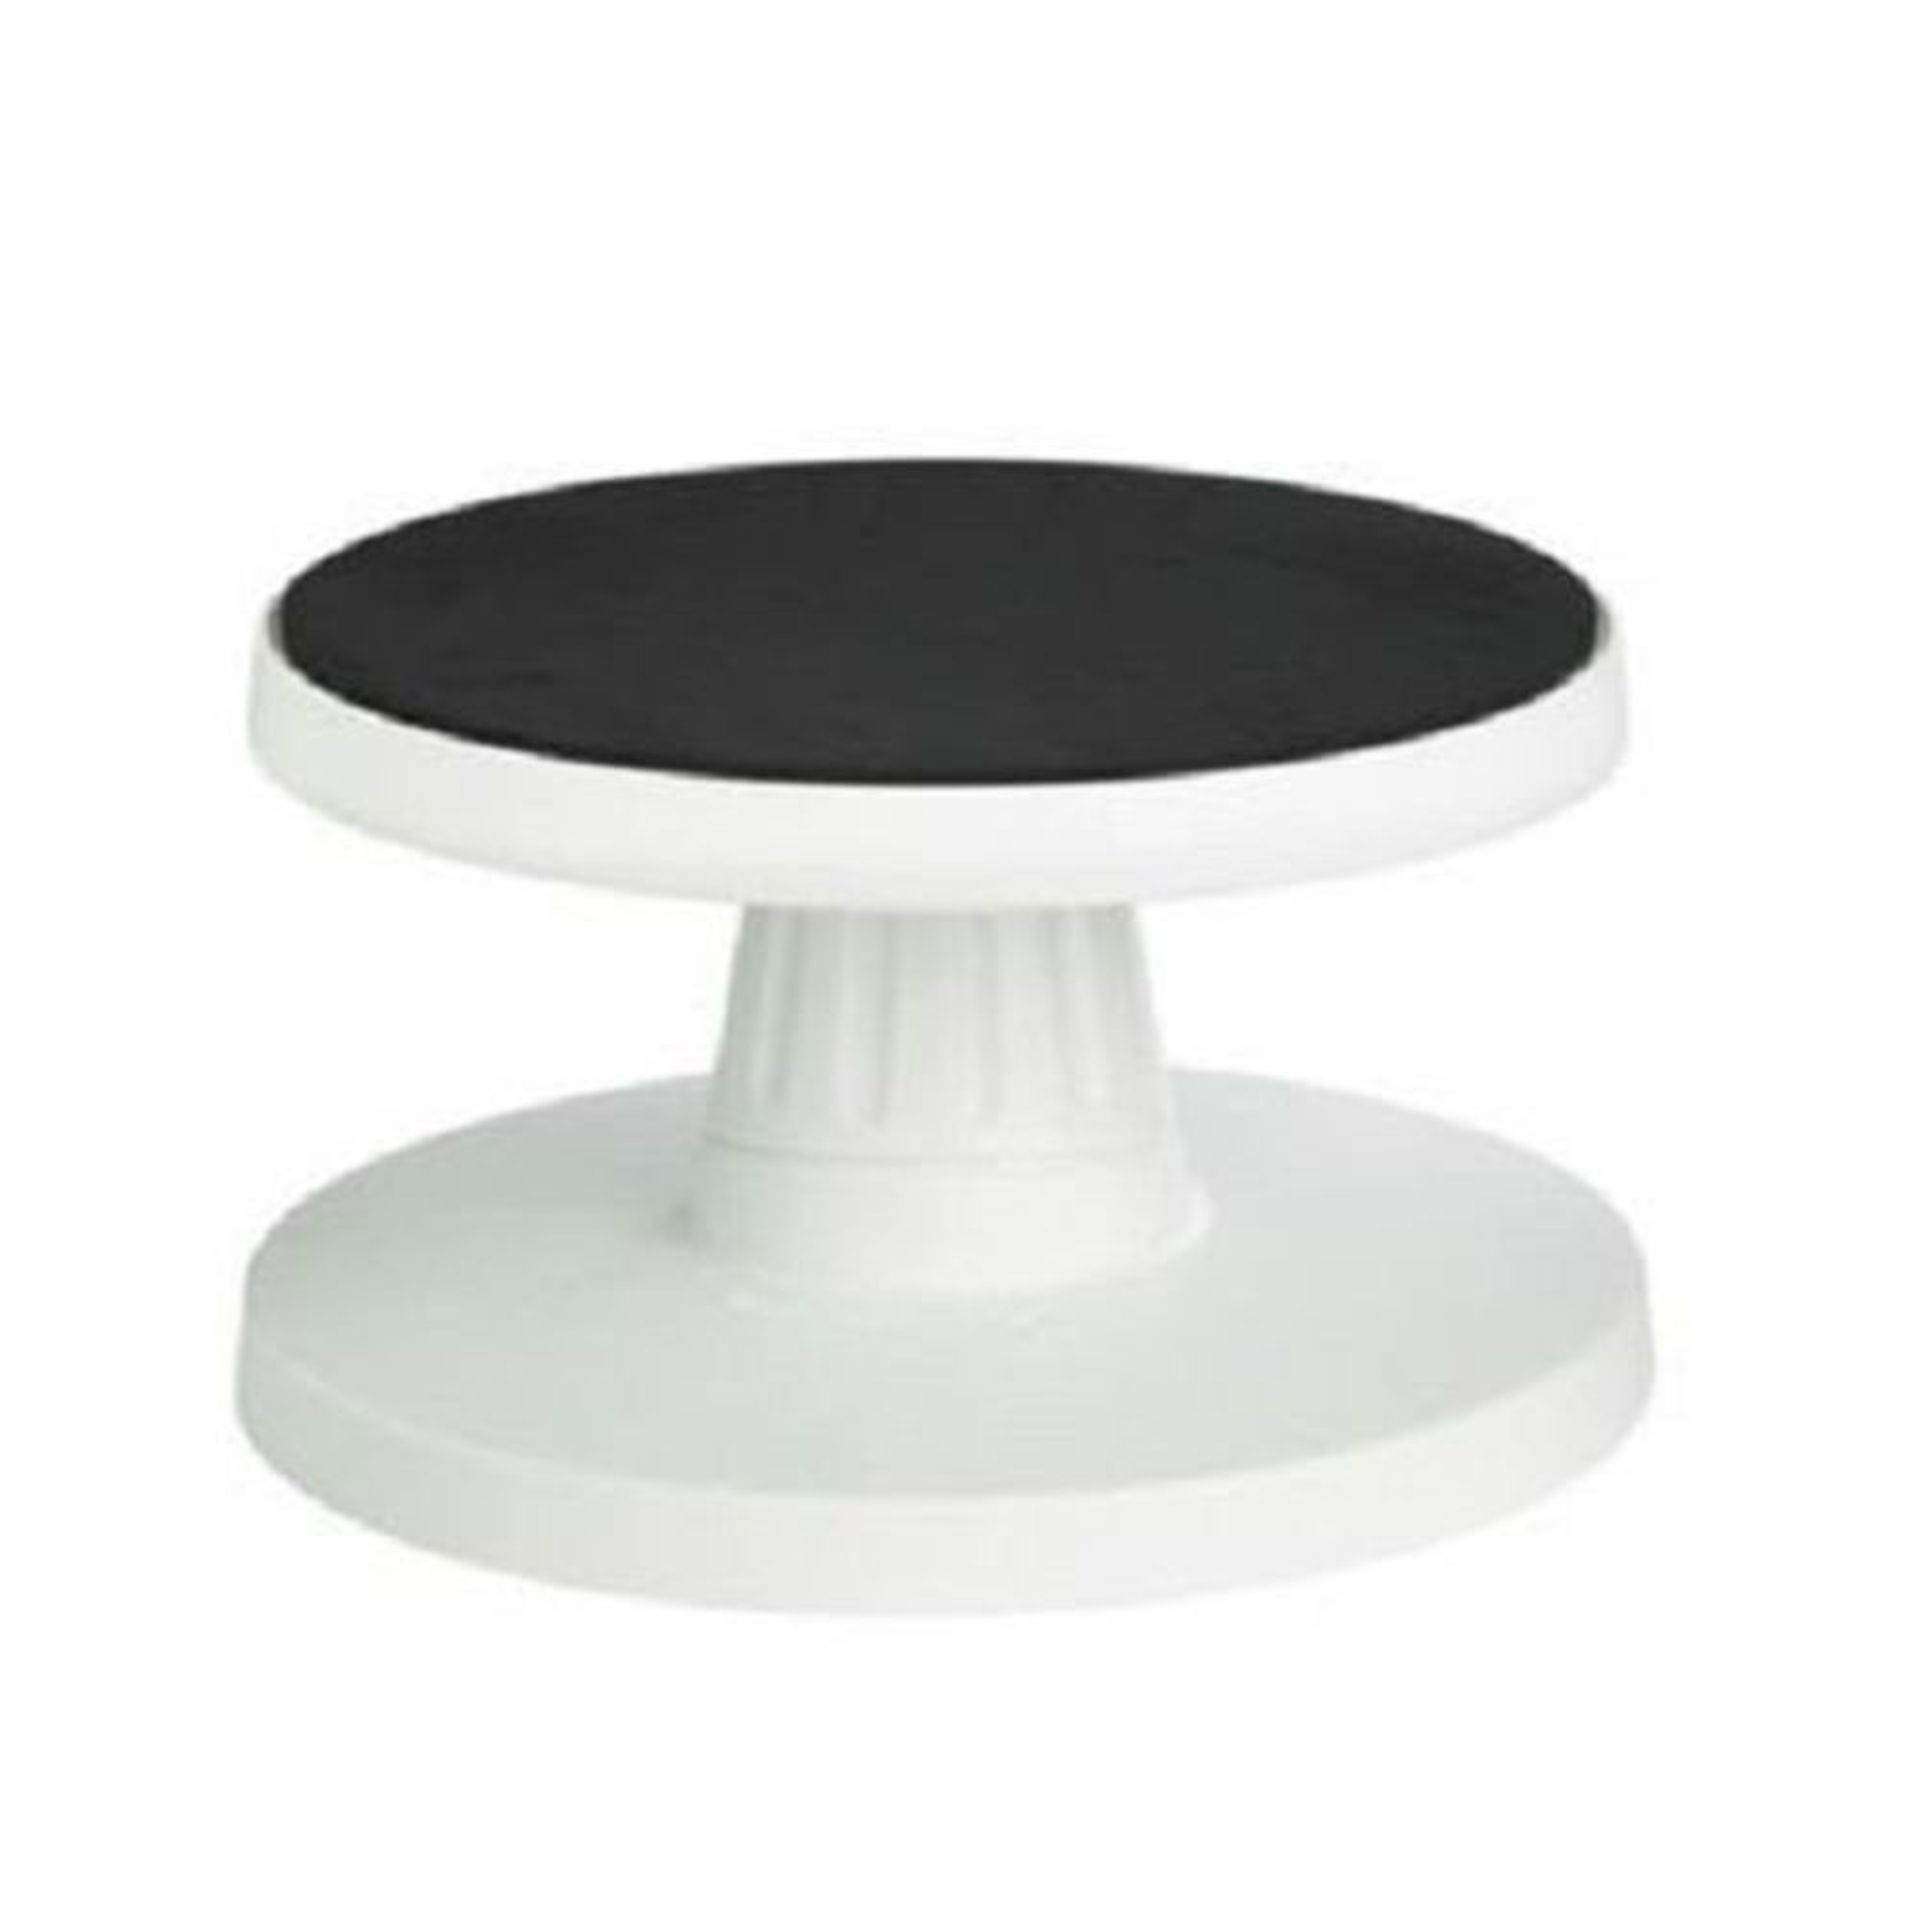 V Brand New Adjustable Cake Decorating Table RRP £20.39 X 2 YOUR BID PRICE TO BE MULTIPLIED BY TWO